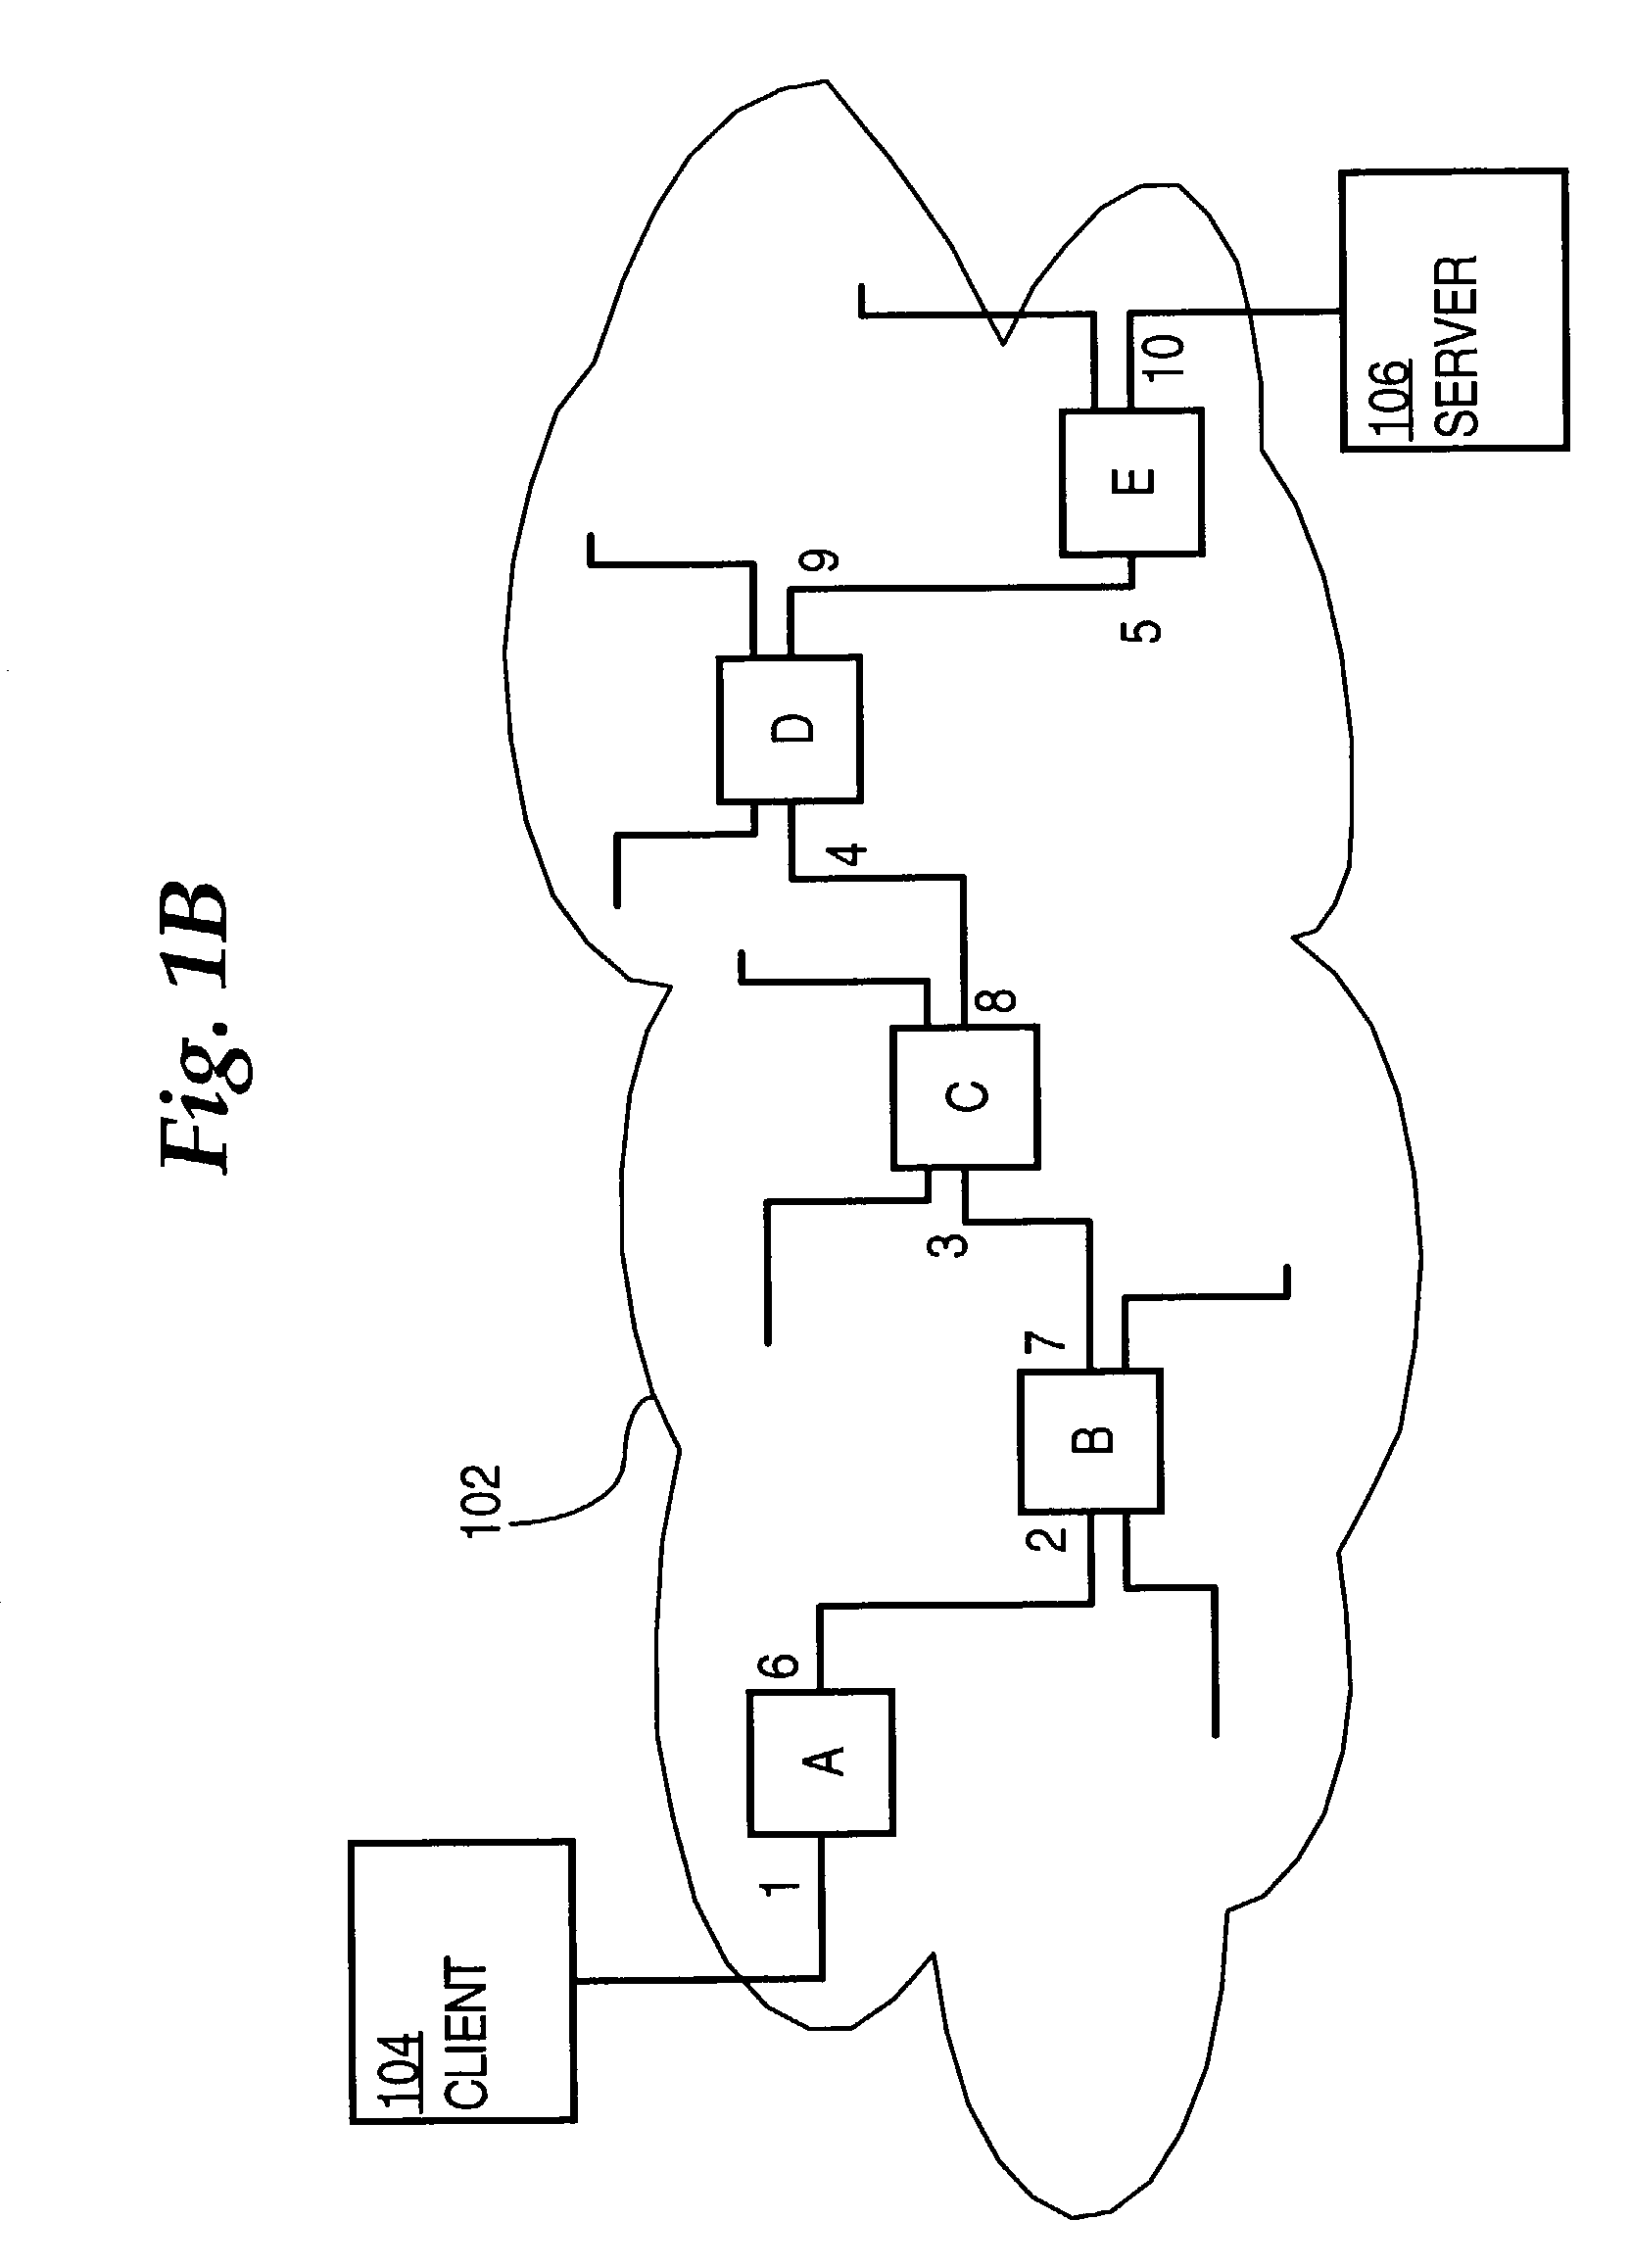 Method and apparatus providing highly scalable server load balancing